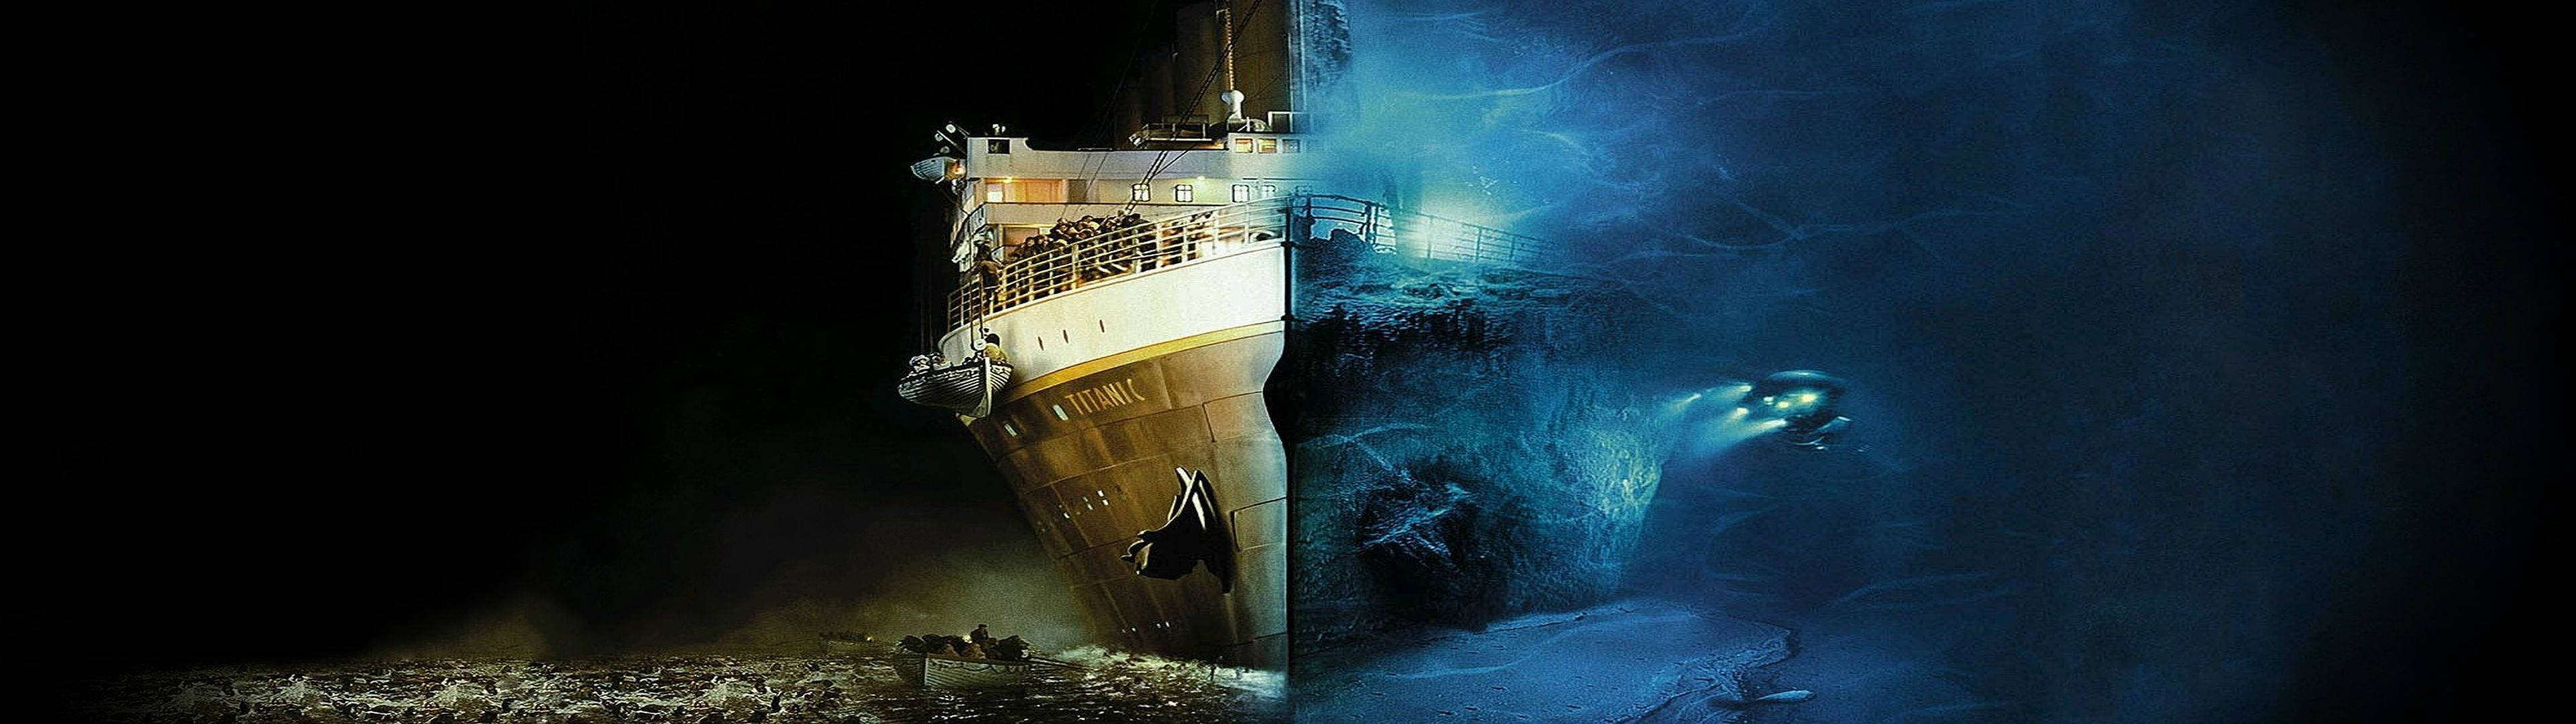 View of the Titanic Above and Below the Sea Wallpaper